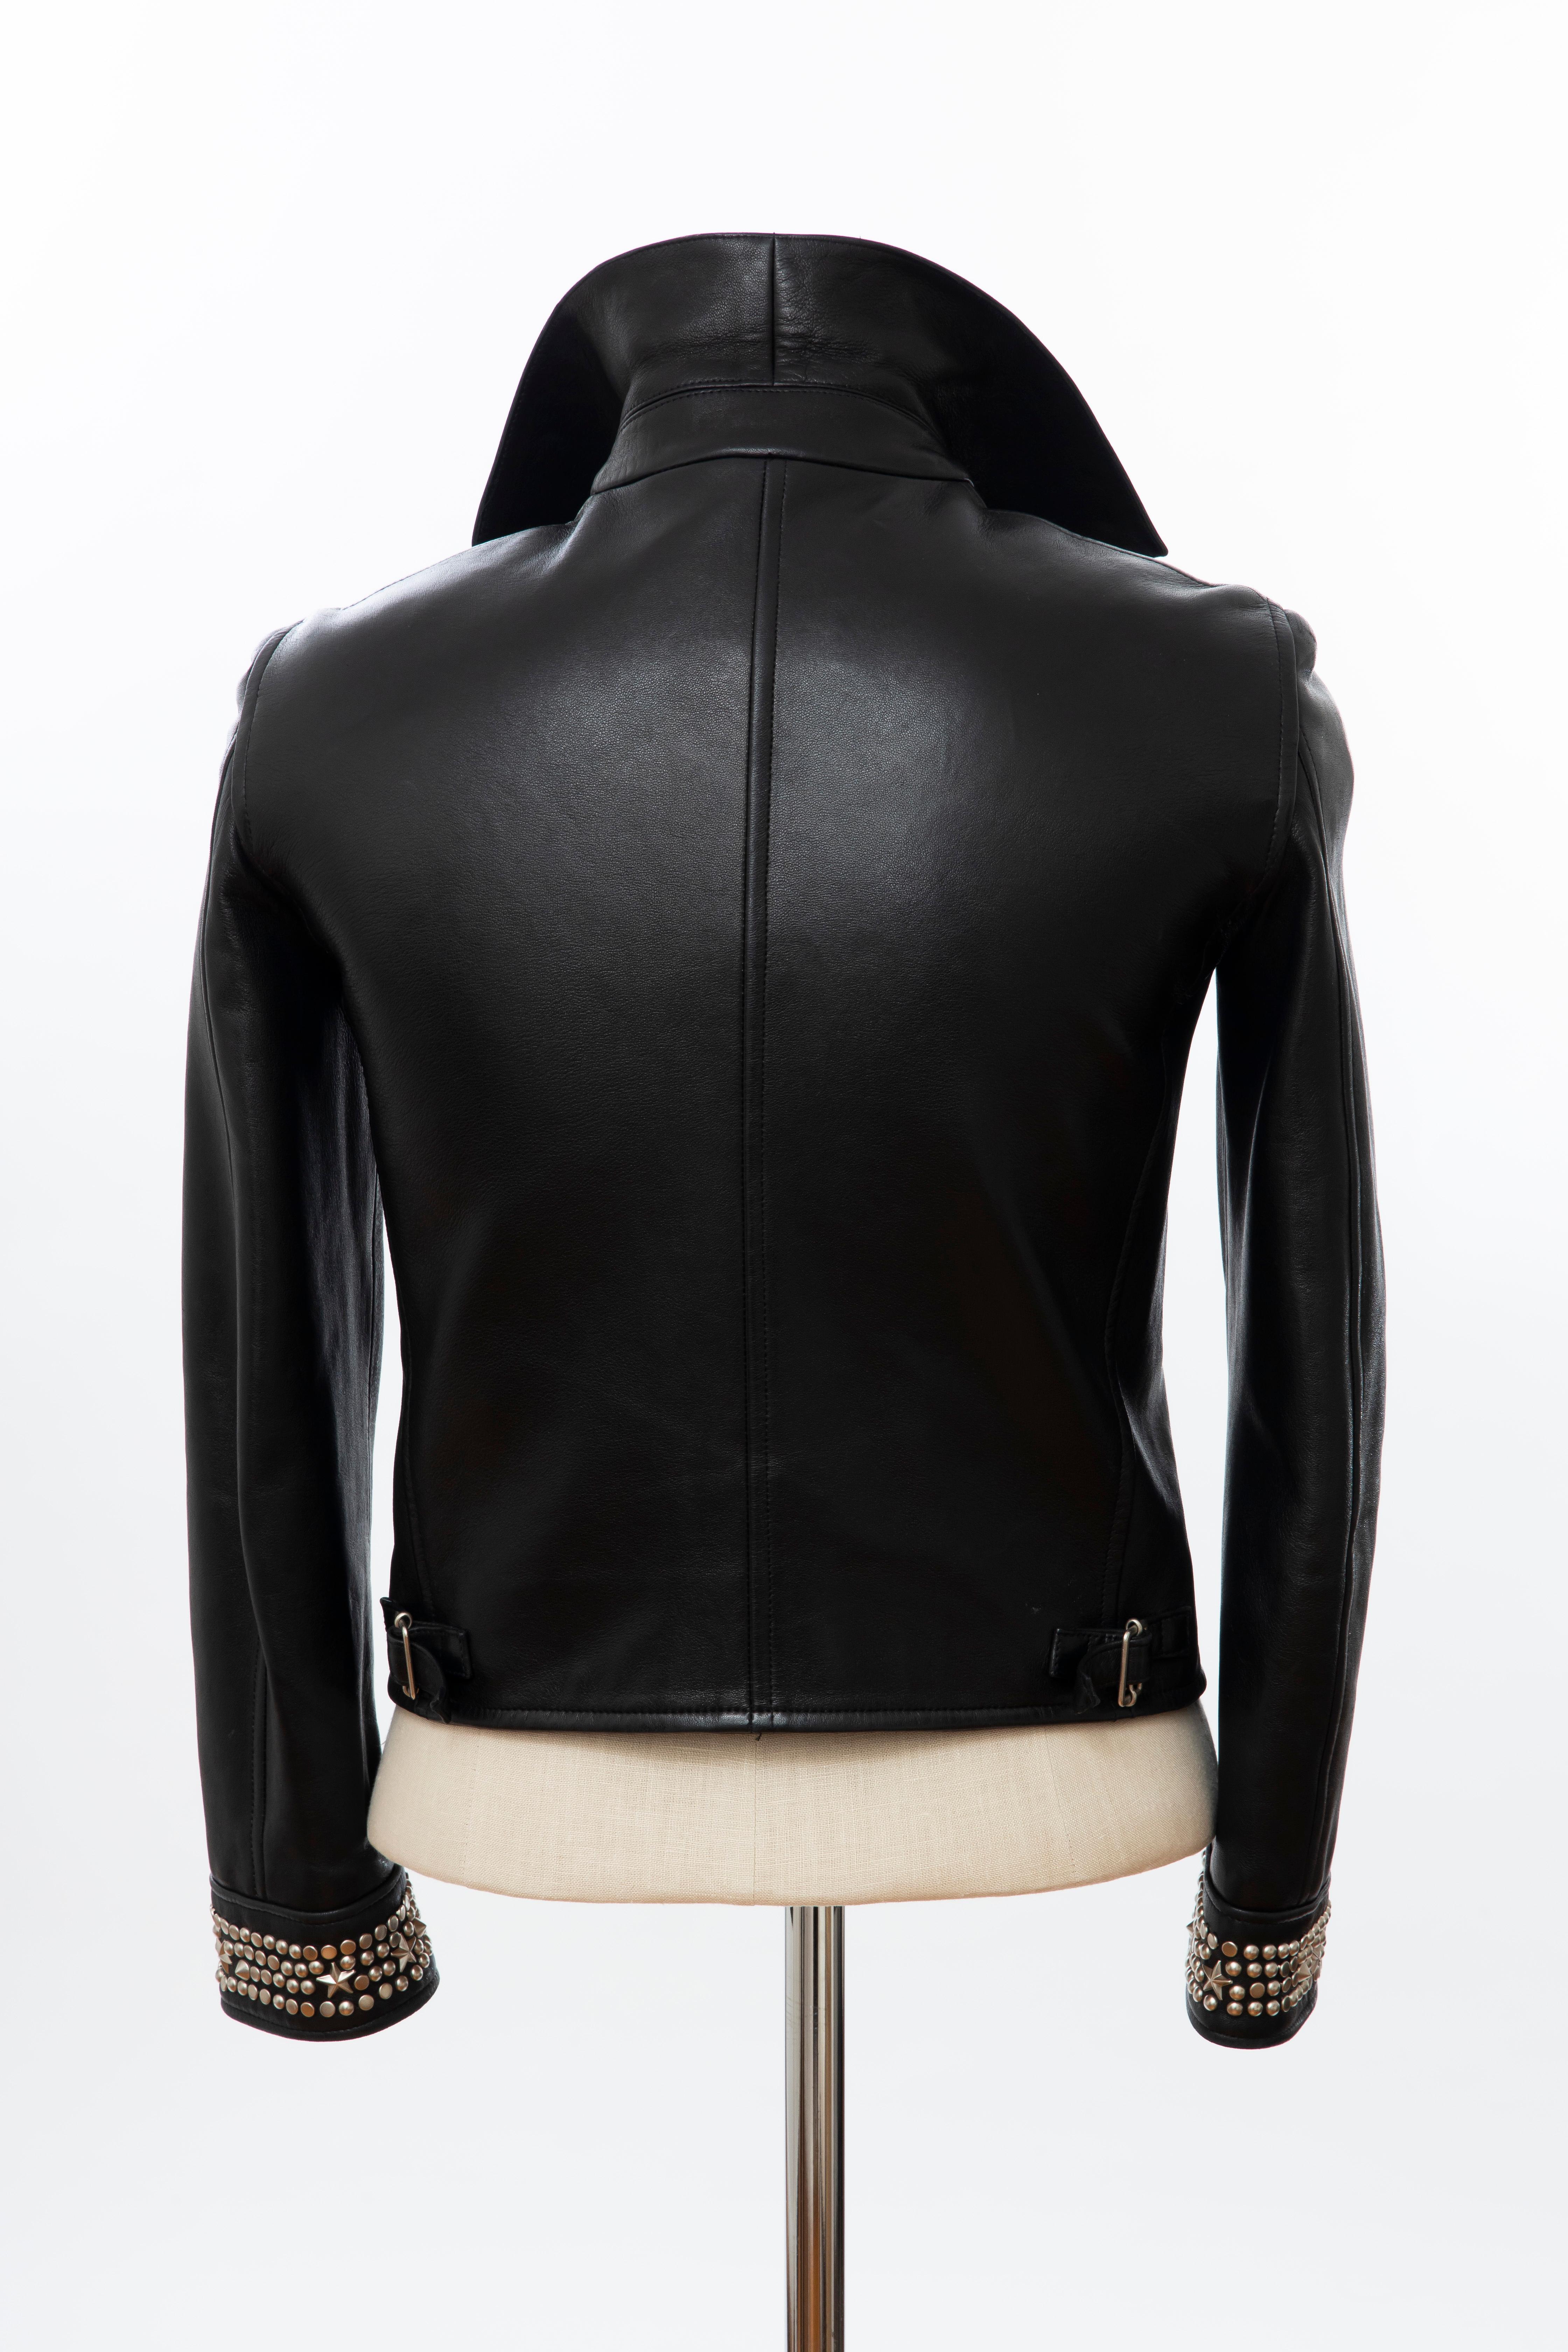 Gianni Versace Black Leather Jacket Pewter Stud Collar & Cuffs,  Circa: 1990's For Sale 2